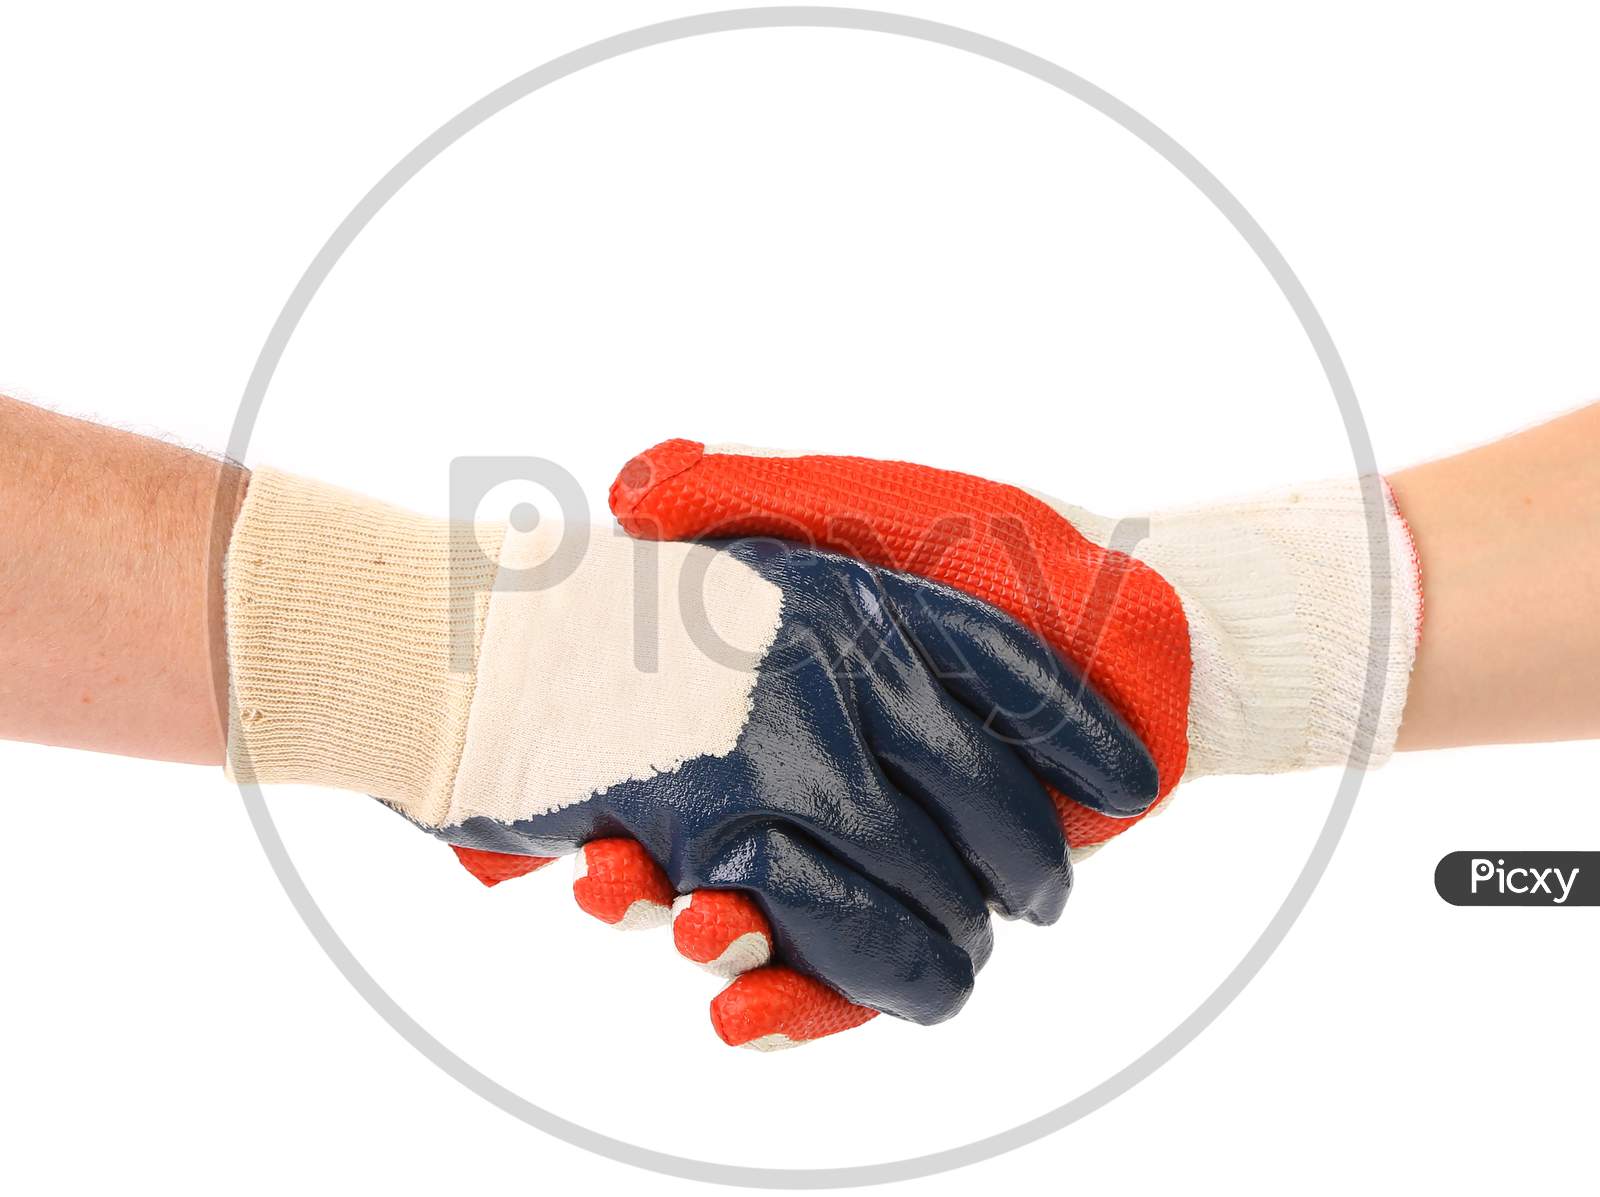 Two Hands In Gloves Of Hand Shake. Isolated On A White Background